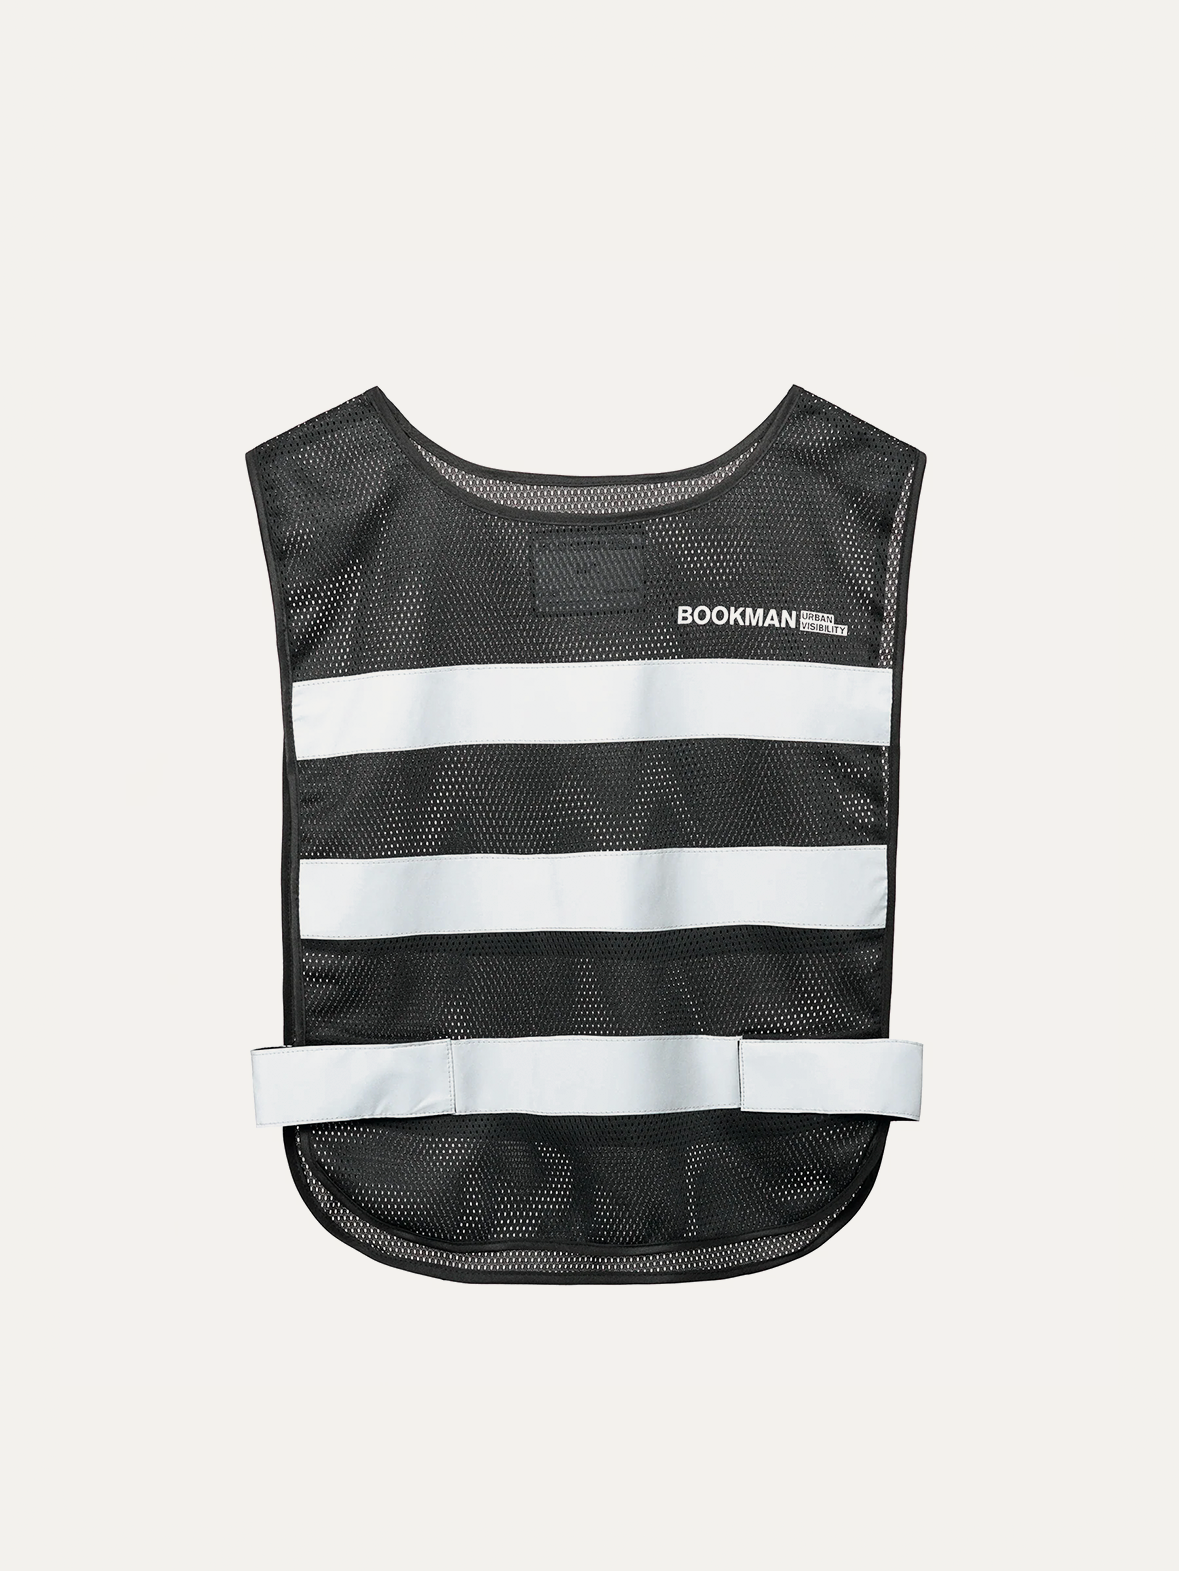 Reflective Safety Vest by Bookman | High Visibility Gear